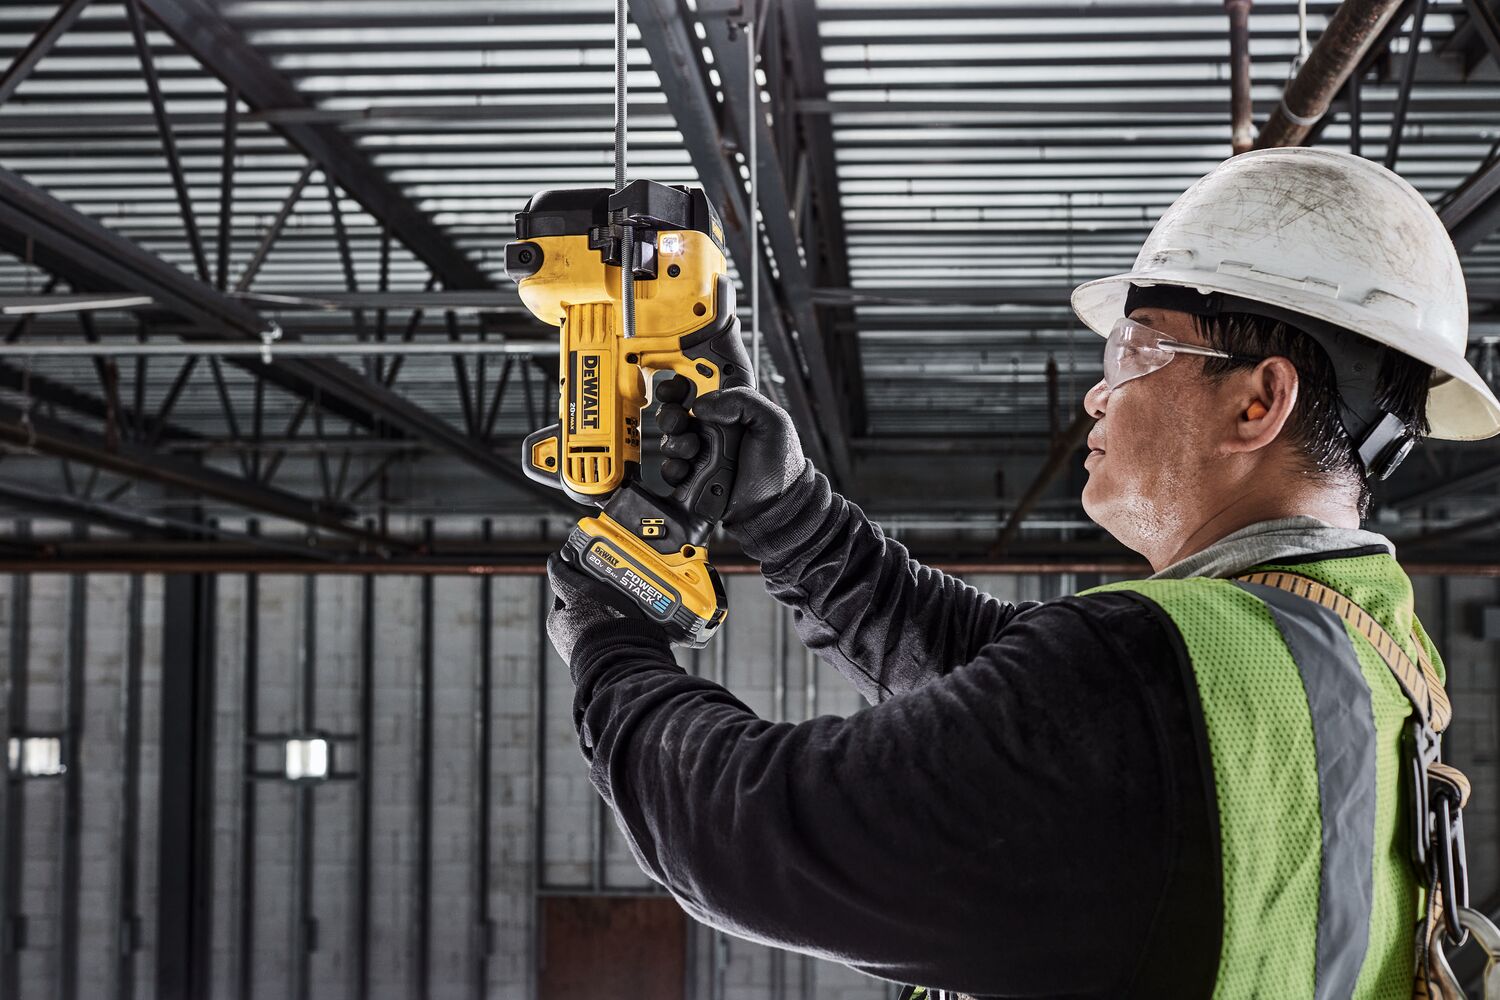 DEWALT Threaded Rod Cutter is being used to cut threaded rod overhead by tradesman in a data center.